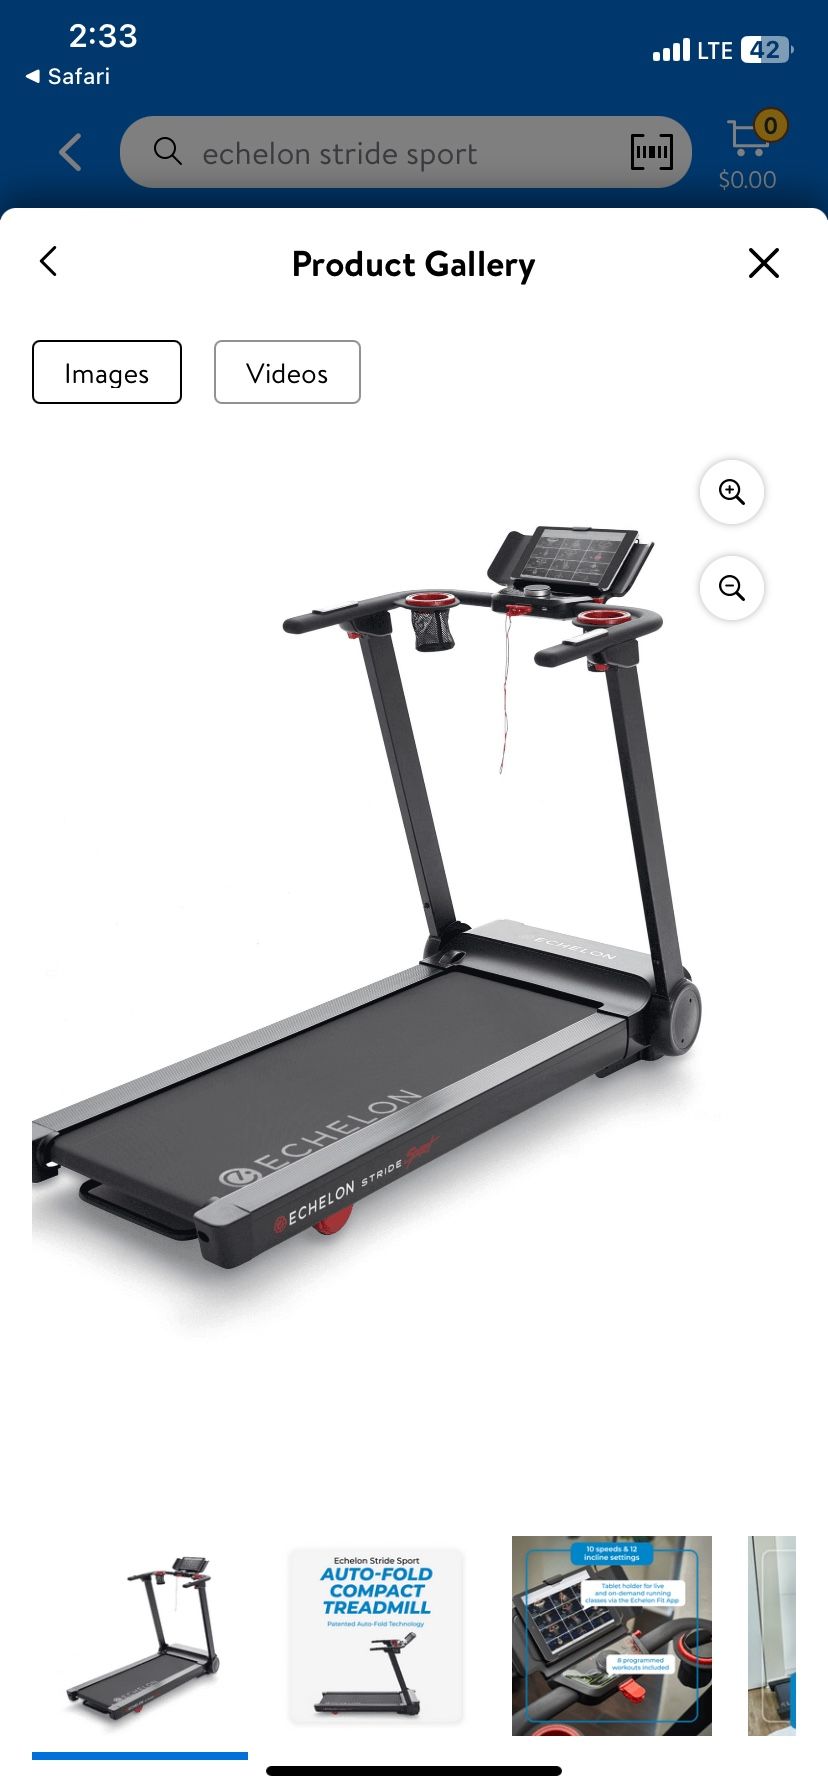 Echelon Stride Sport Auto-Fold Compact Treadmill with 12 Levels of Incline + 30-Day Free Membership